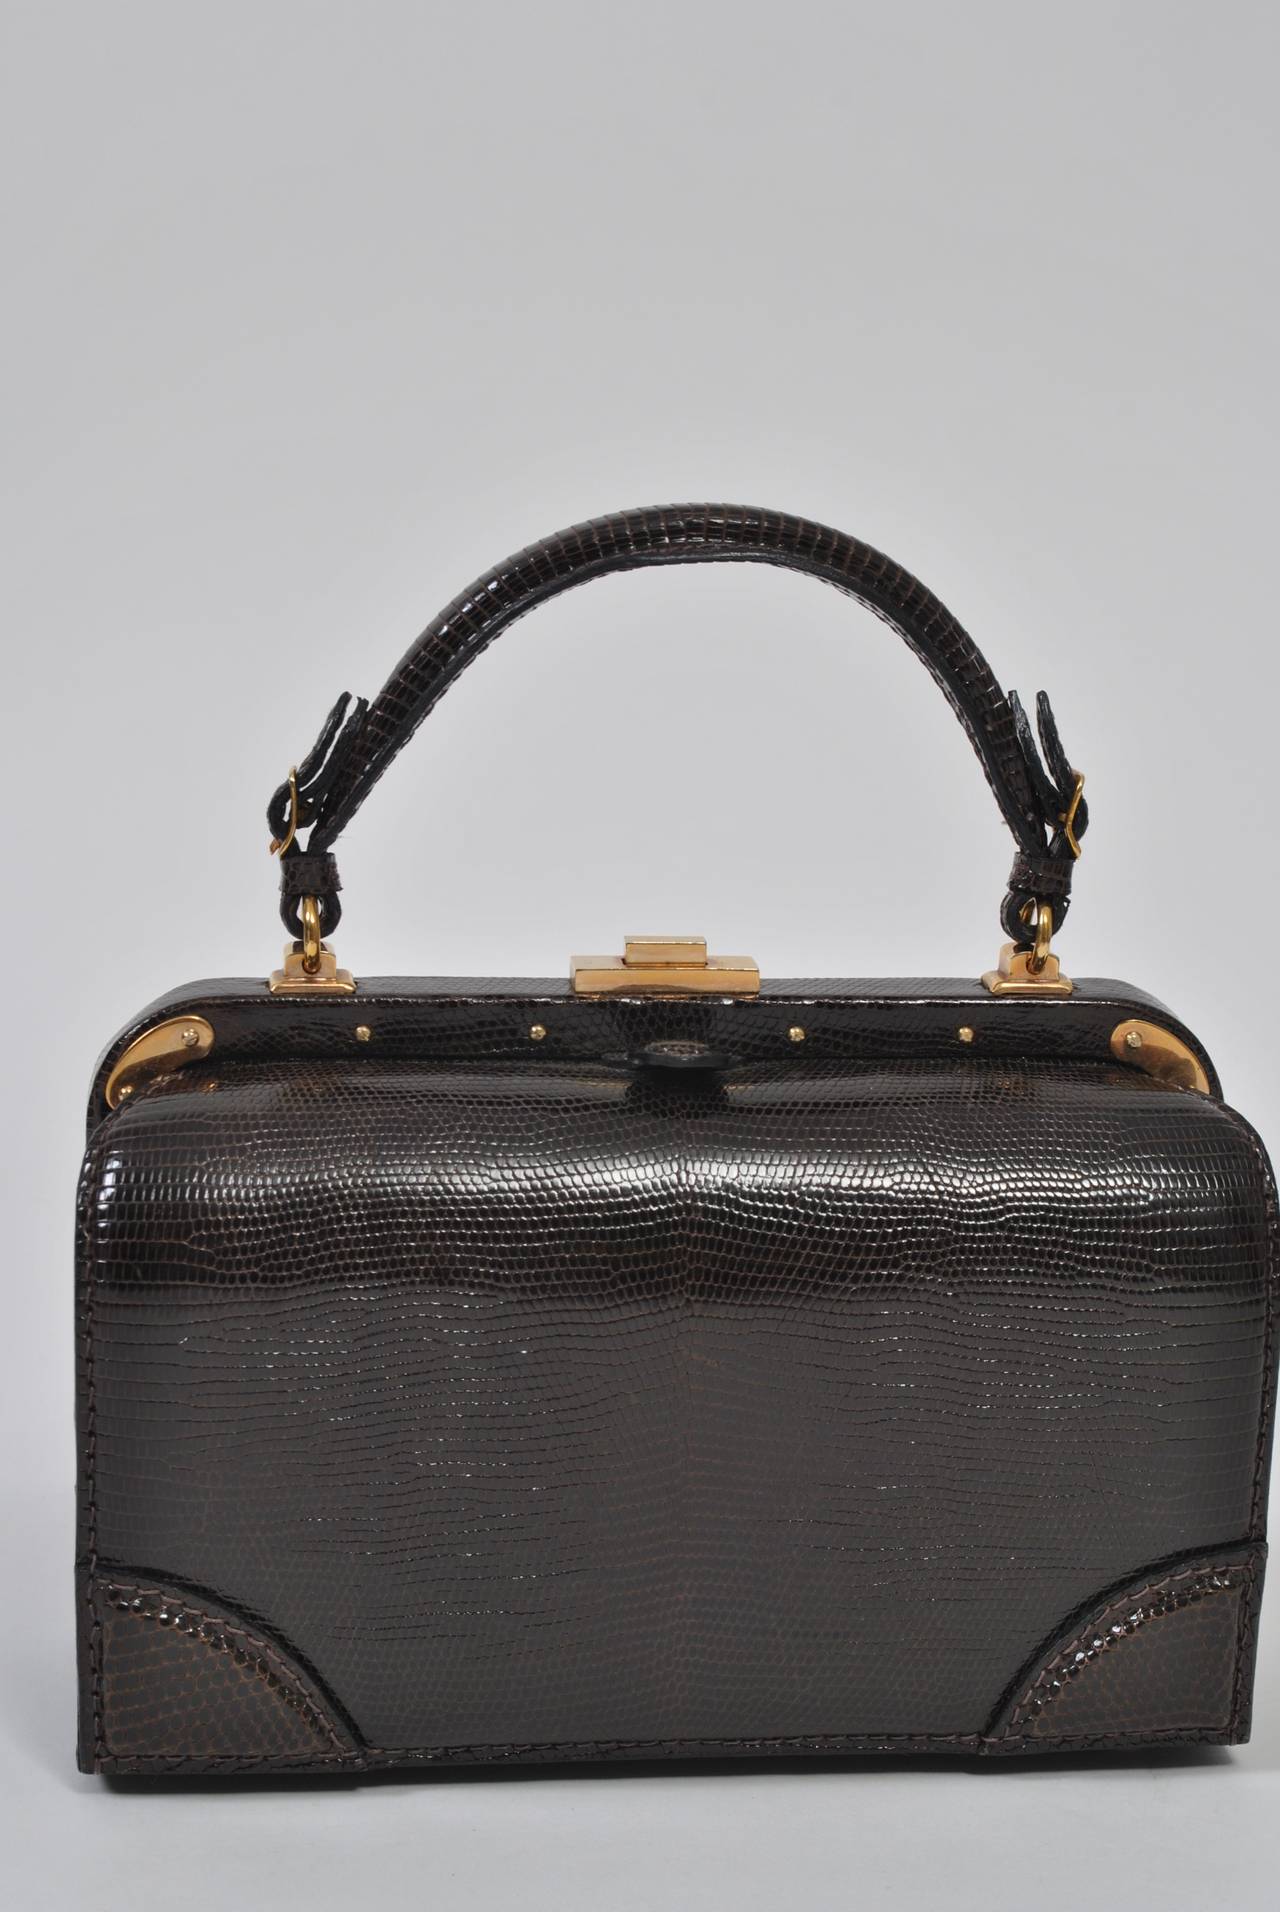 From high-end leather goods purveyor Lederer, this private-label 1960s handbag is crafted in France of brown lizard and features distinctive gold metal hardware throughout. The rounded box shape is classic mid century and is in mint condition. Press